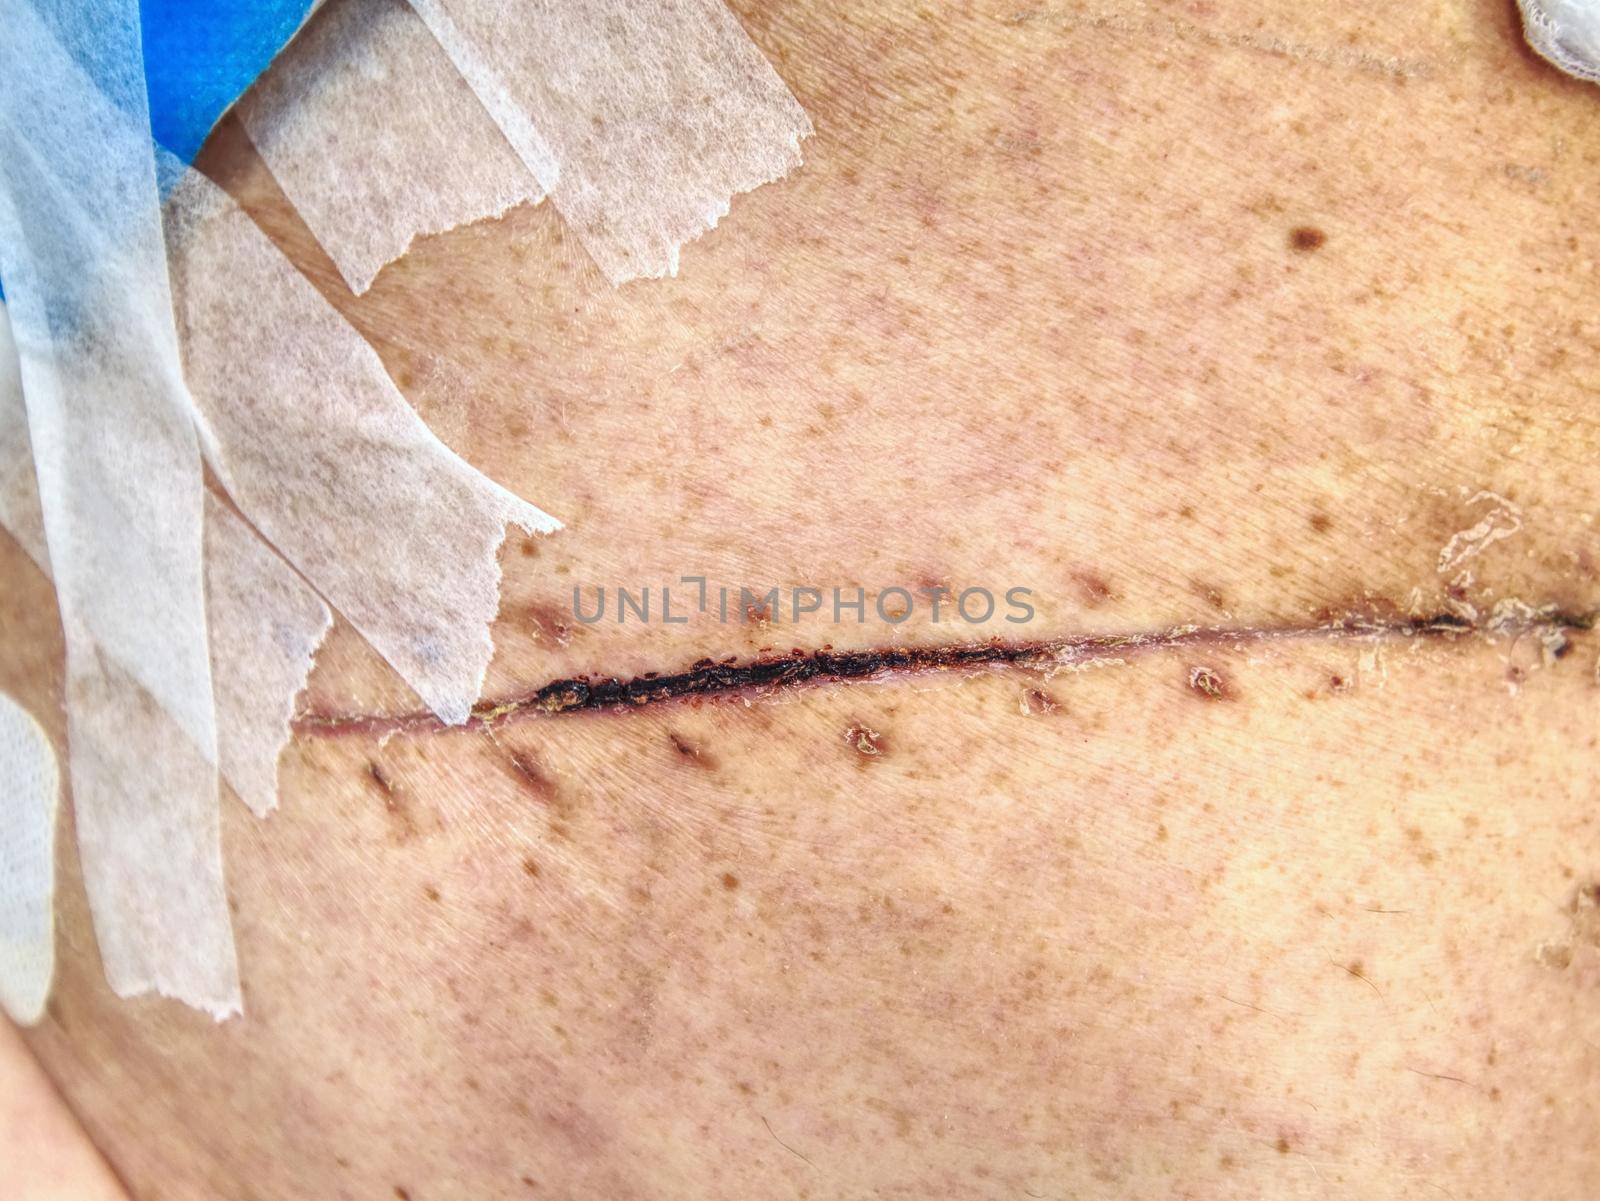 Father after cancer  liver and bowel cancer surgery. Bandage of fresh scar on the abdomen and side of male body.